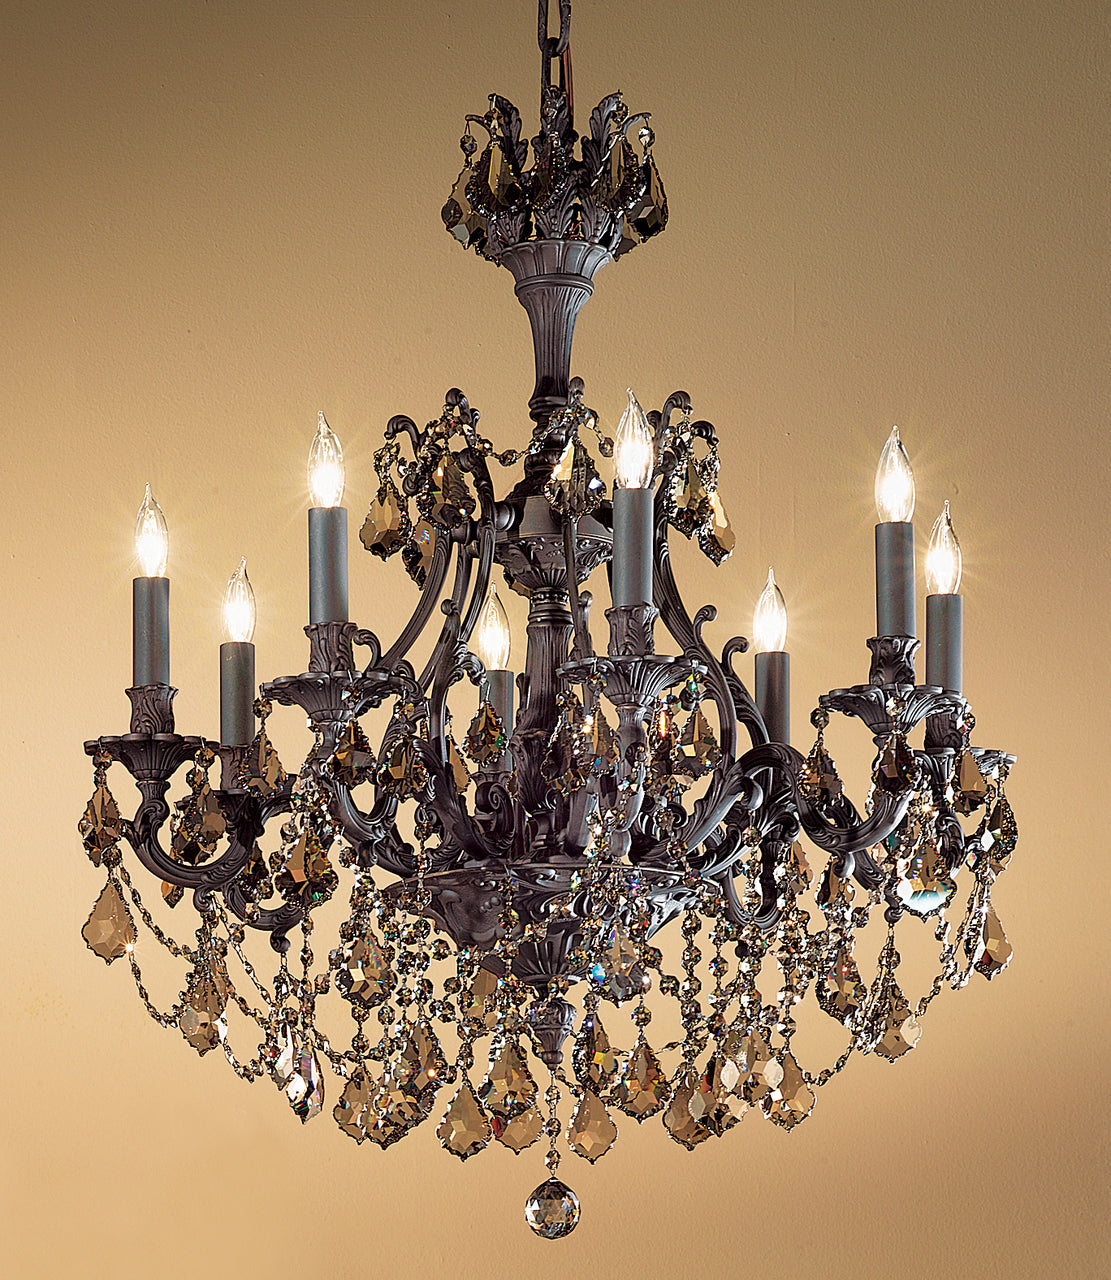 Classic Lighting 57358 FG CBK Majestic Imperial Crystal Chandelier in French Gold (Imported from Spain)